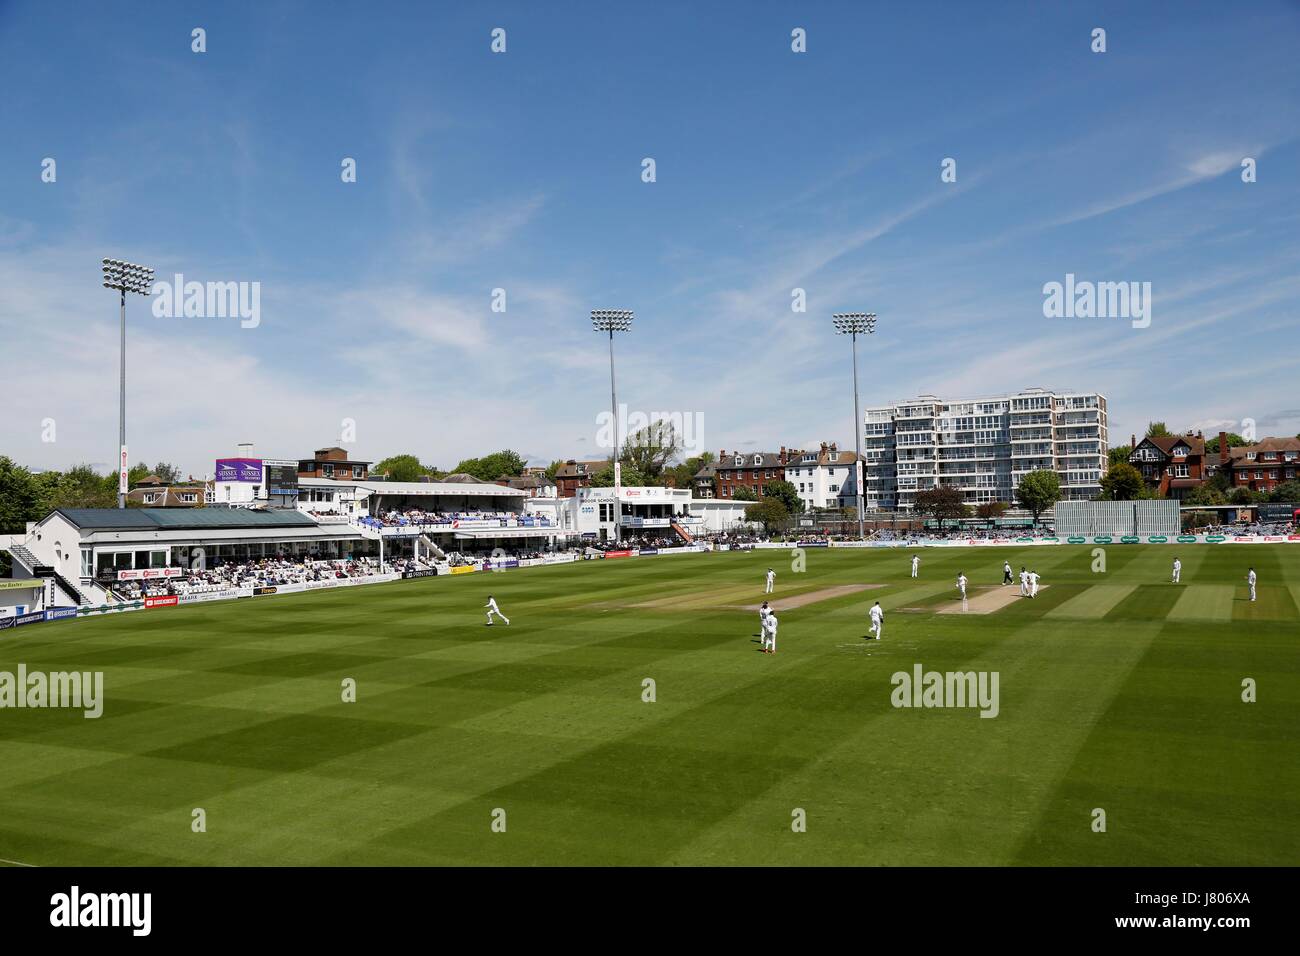 General view of the County Ground in Hove during the County Championship match between Sussex and Durham. Stock Photo